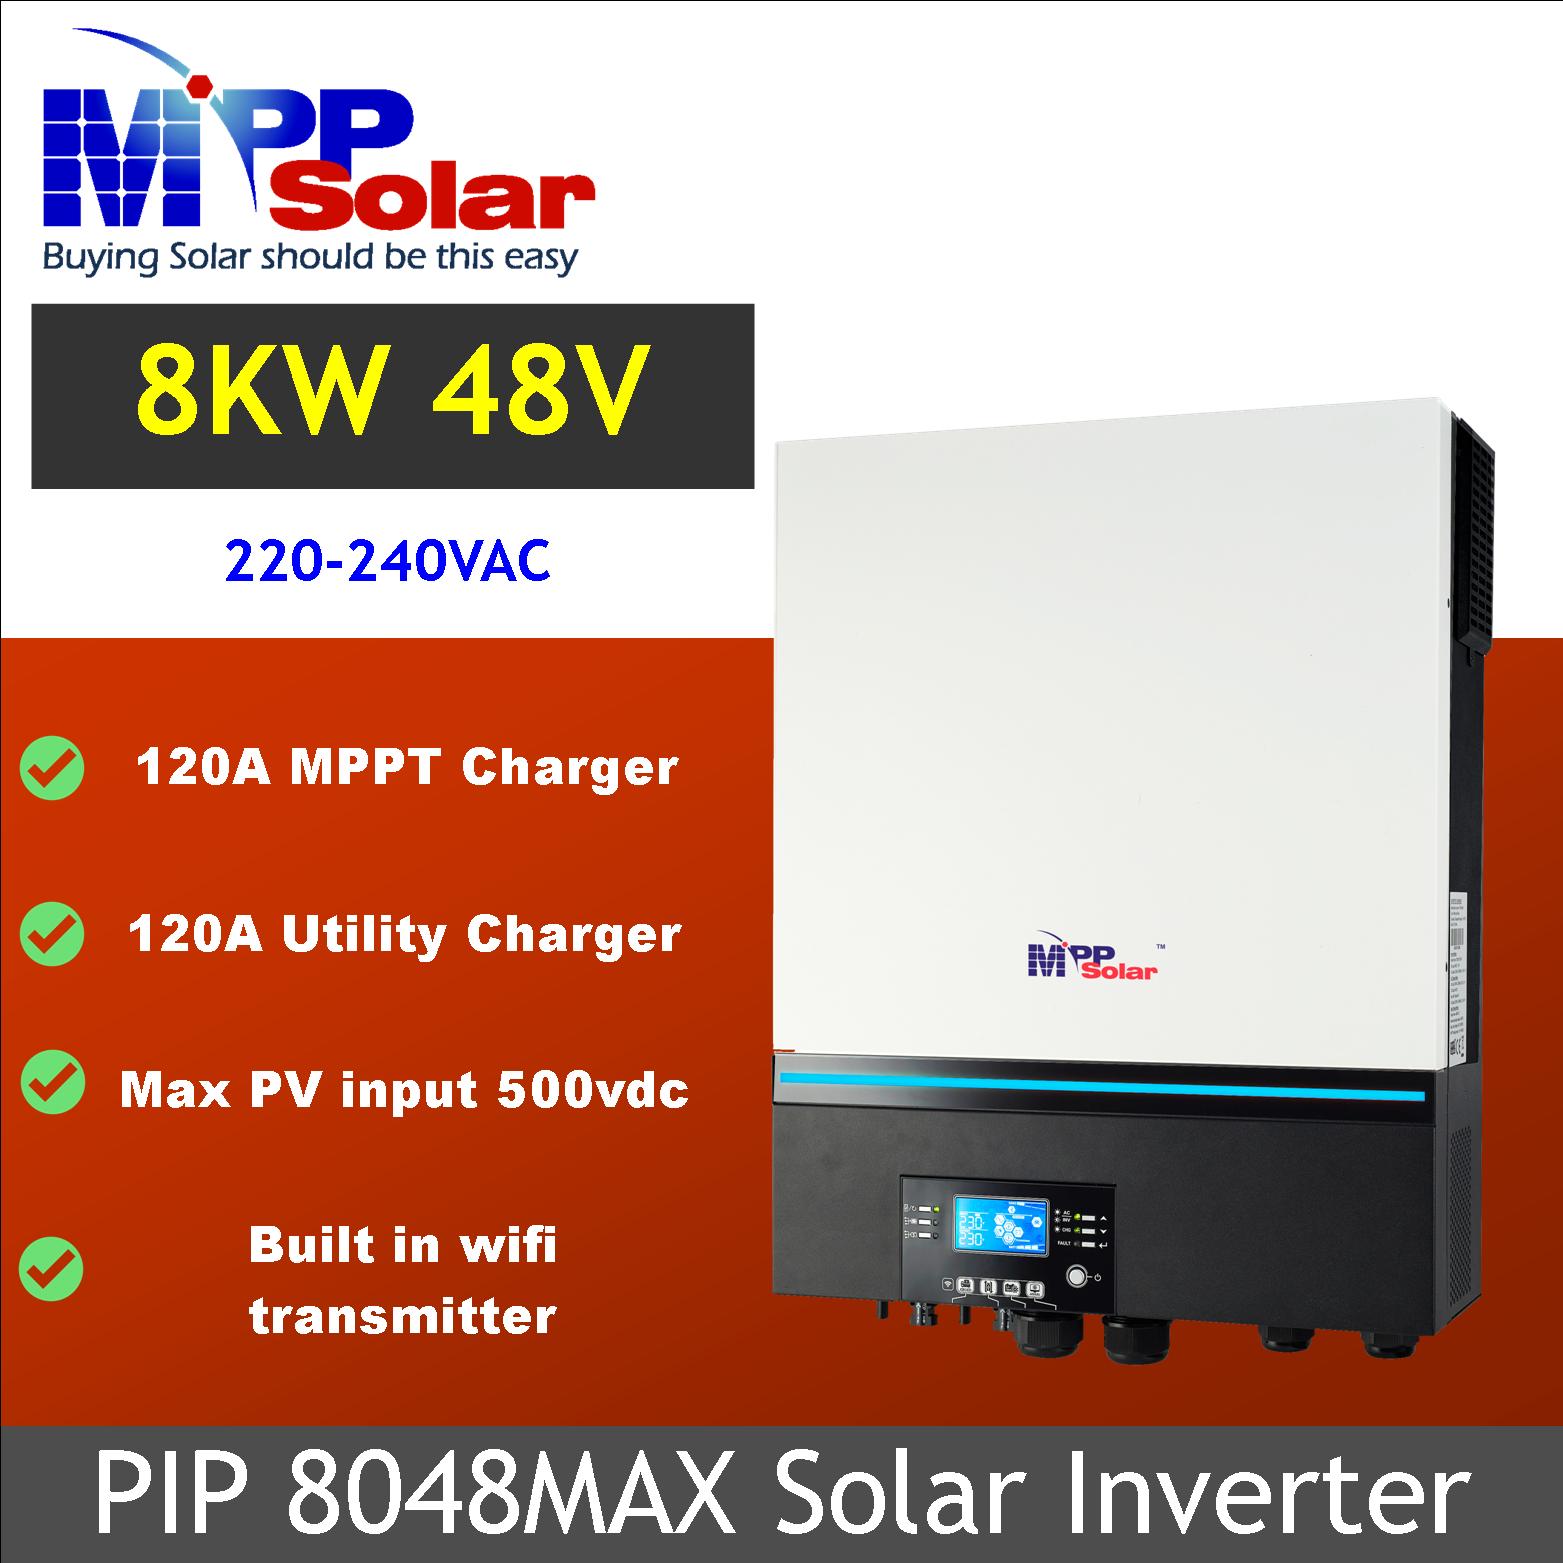 MPP Solar LV6548V New Model - 390V PV, CAN Support, Idle Power, and More 